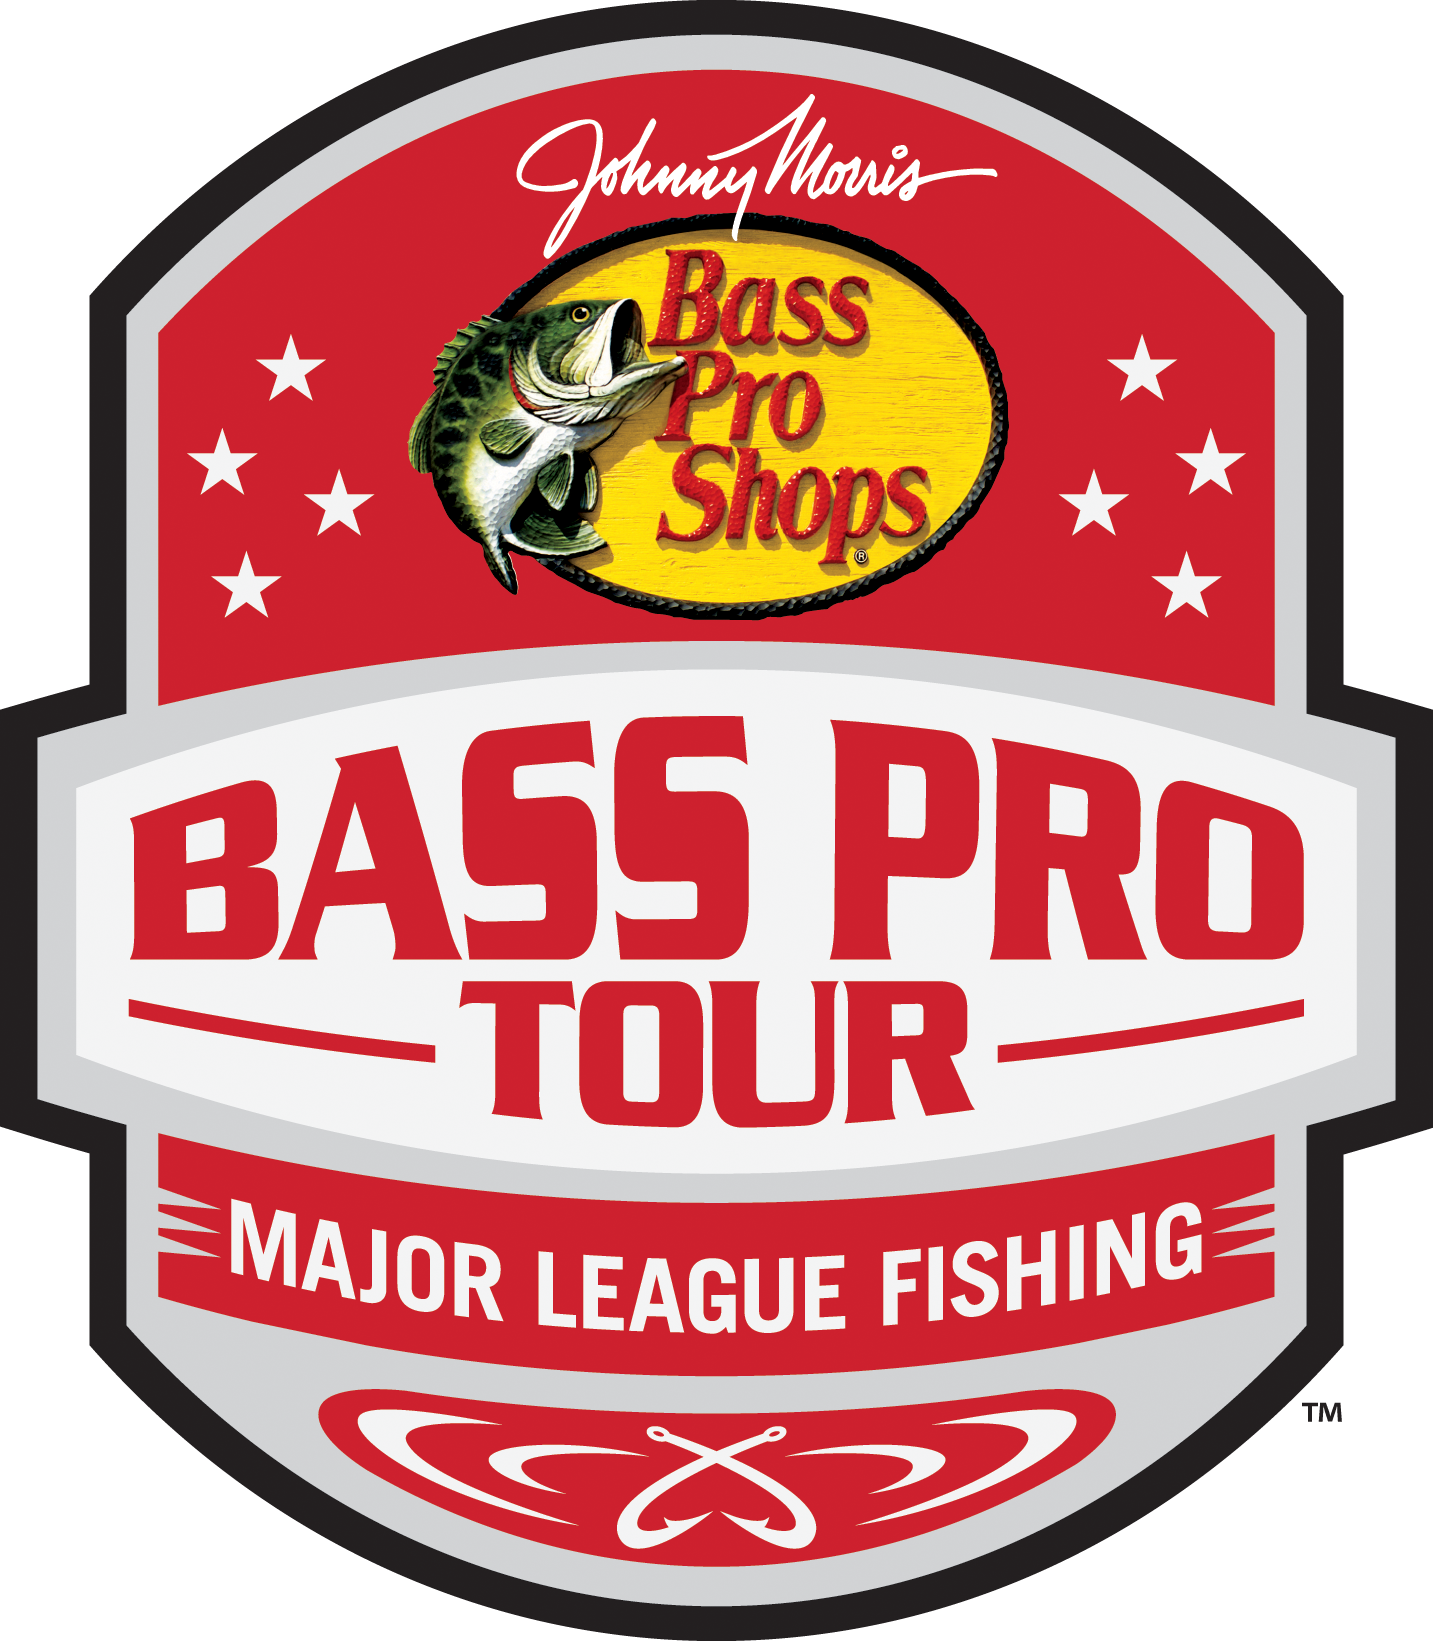 Major League Fishing - Bass Pro Tour: Stage Two Santee Cooper Lakes -  Clarendon County Chamber of Commerce